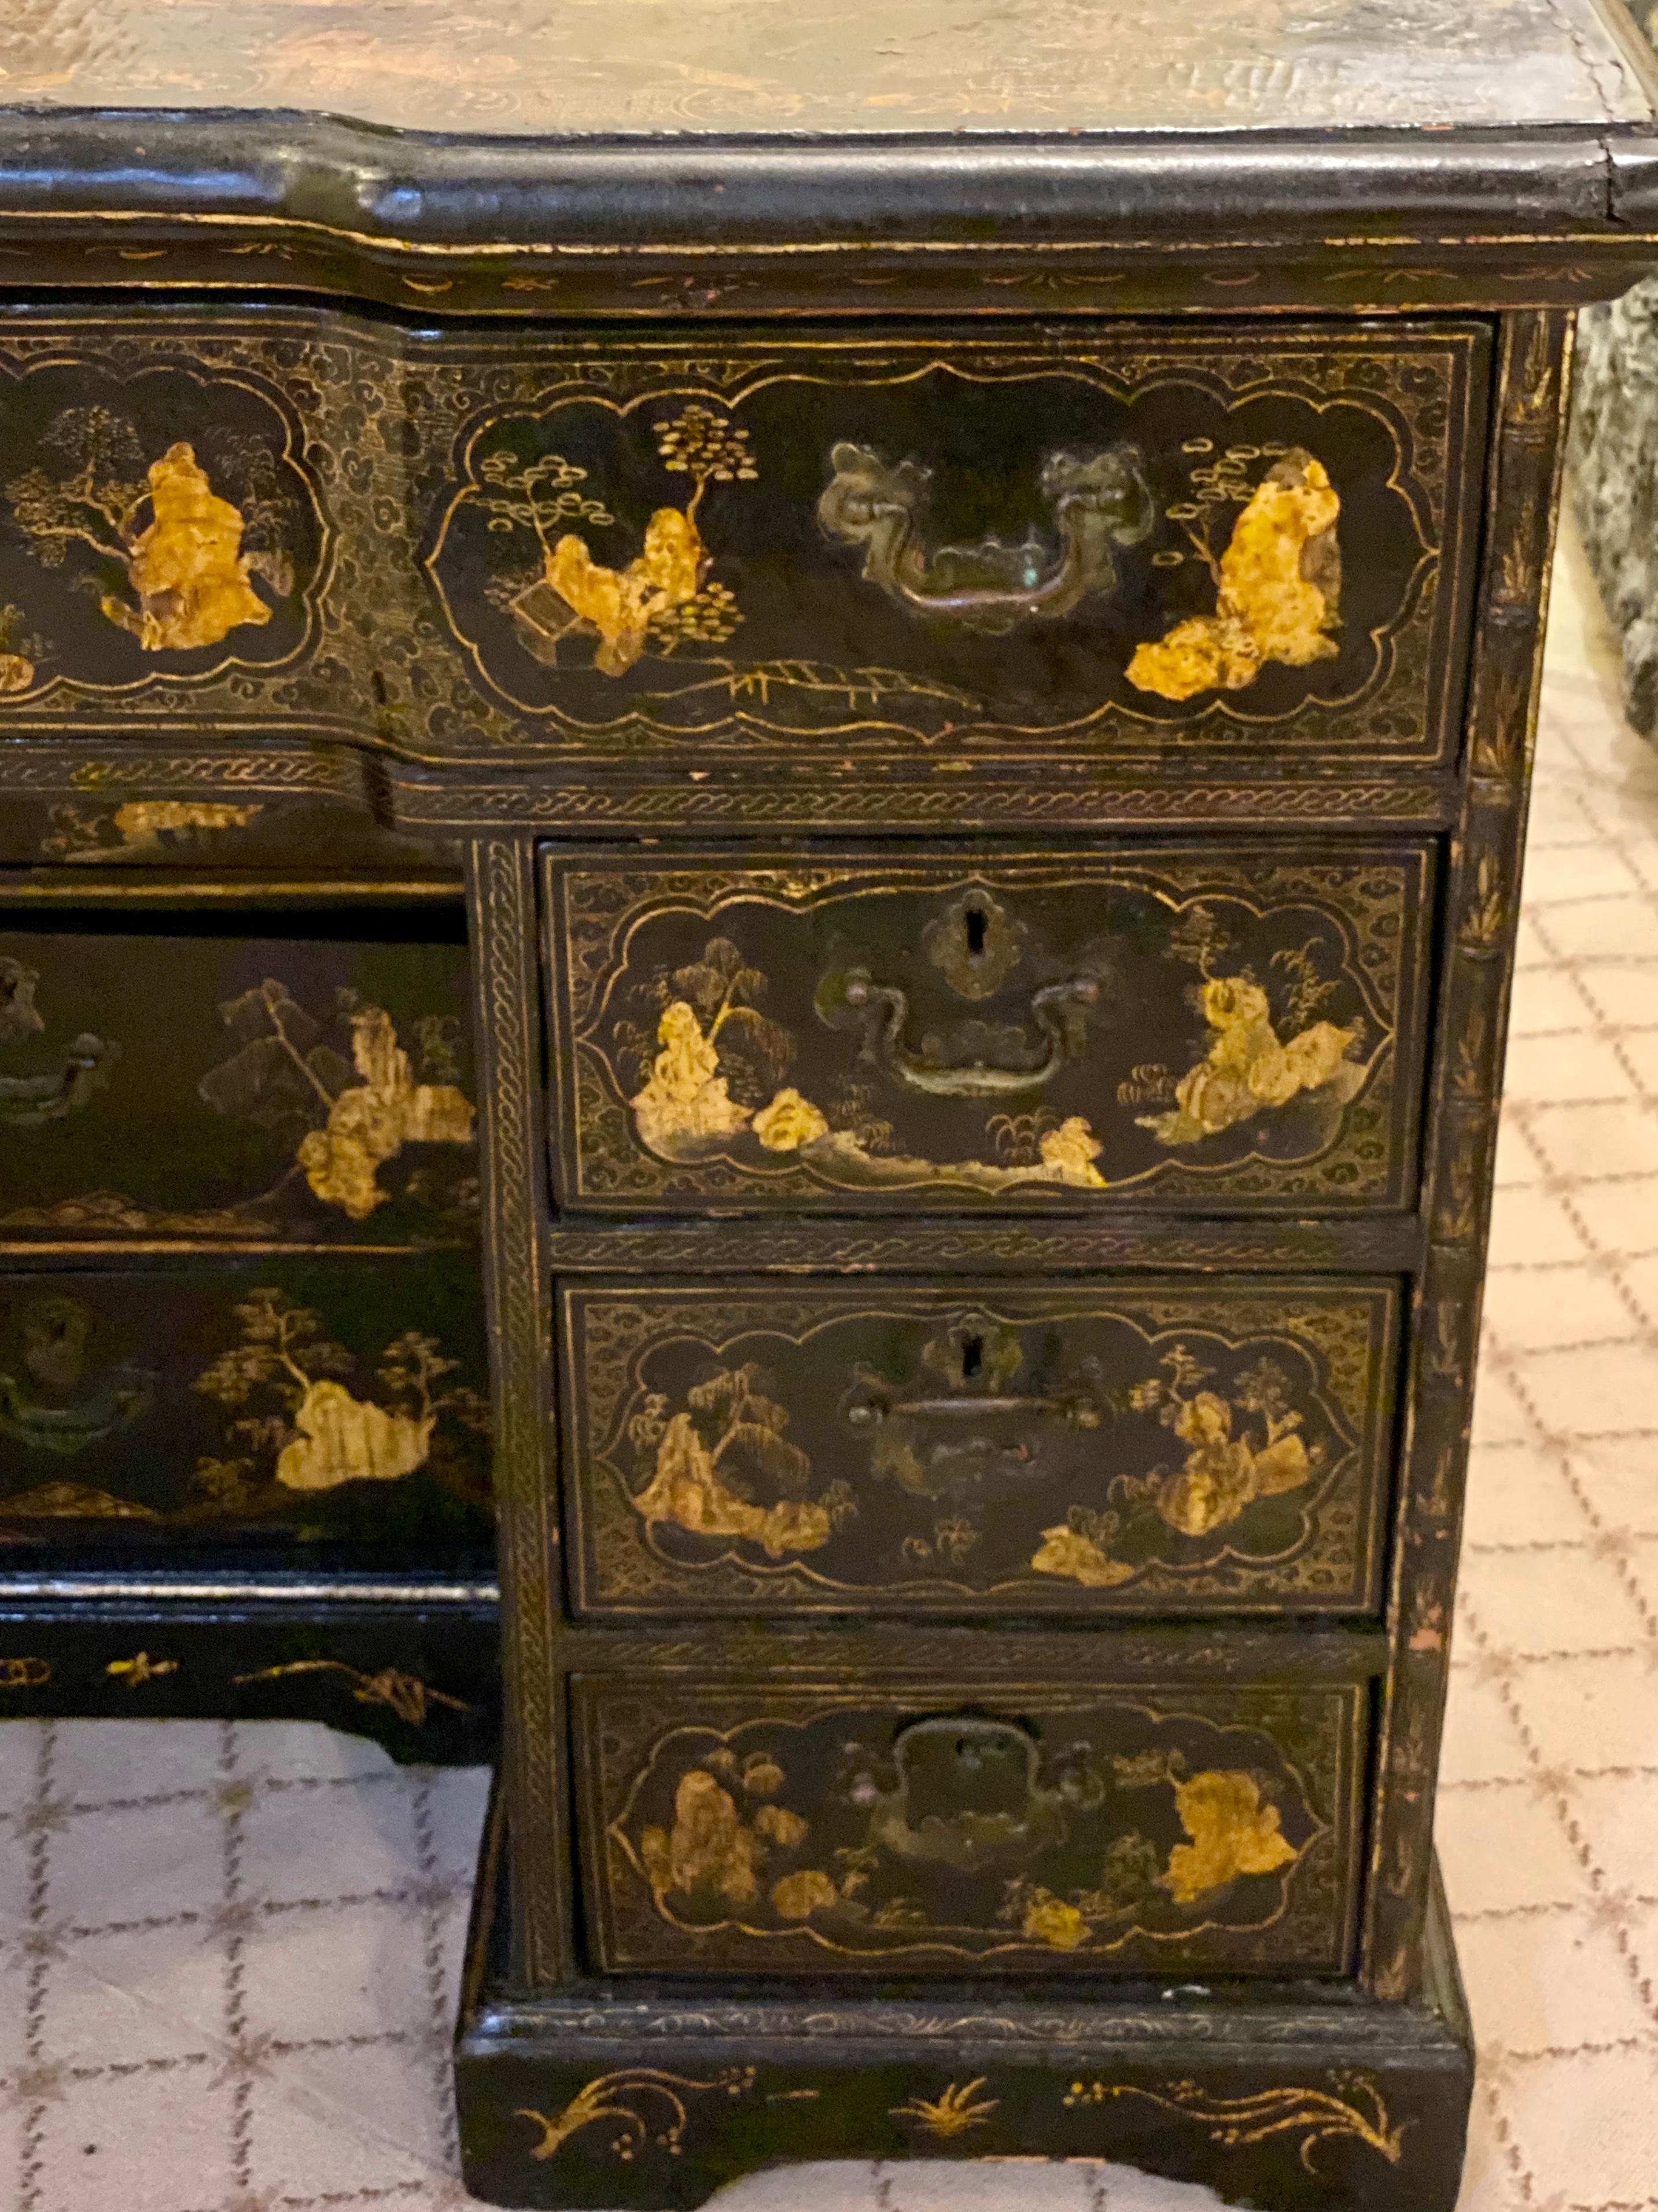 18th-19th Century Chinese Export Chinoiserie Lacquer Decorated Knee Hole Desk 1